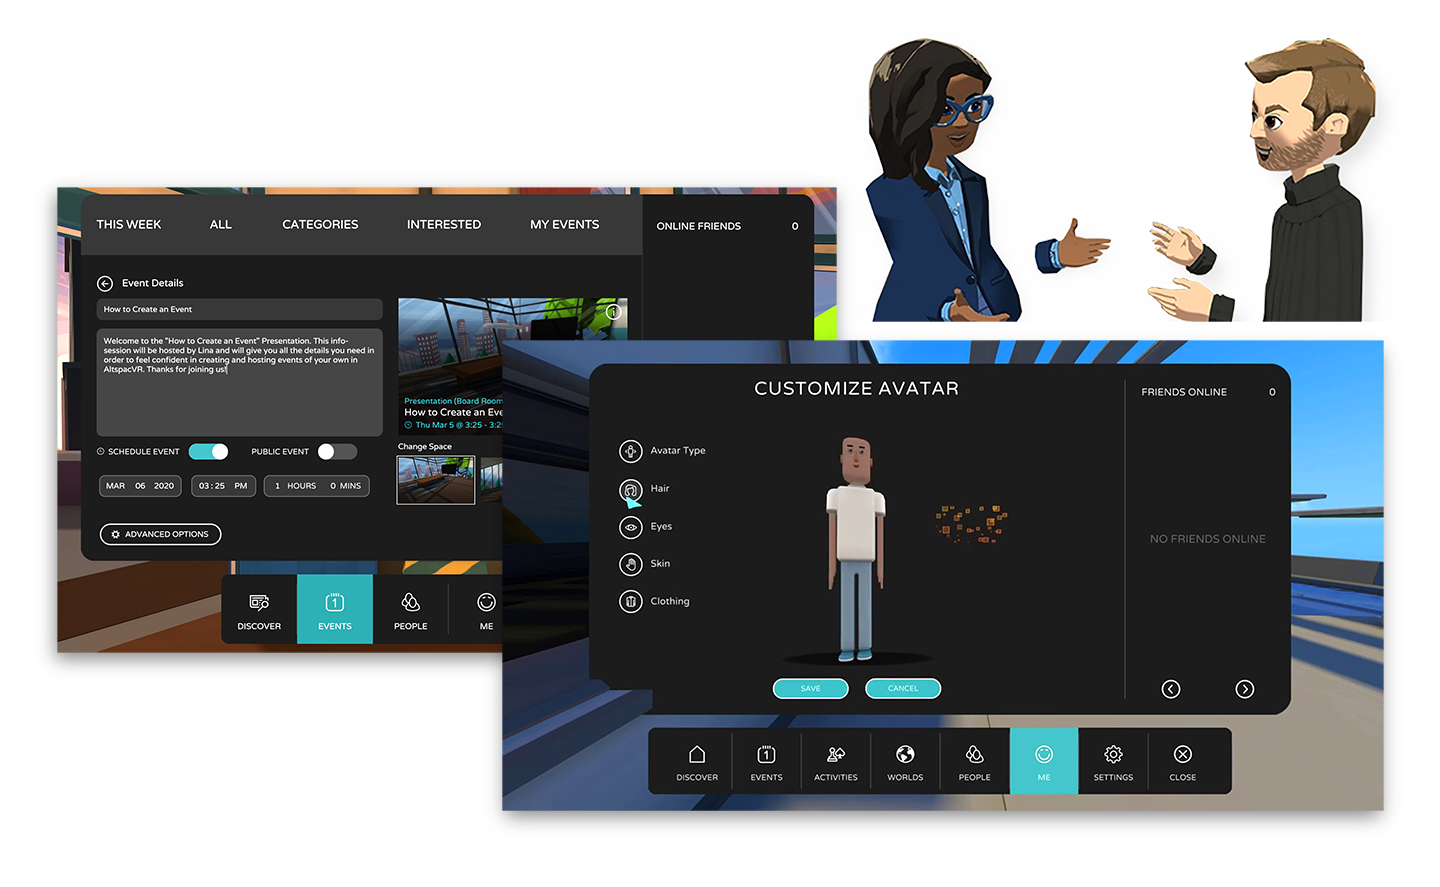 Composite image of AltspaceVR screenshots for creating custom avatars, as well as an image of two avatar people - a man and a woman - in a conversation, floating above the screenshots. featured Image